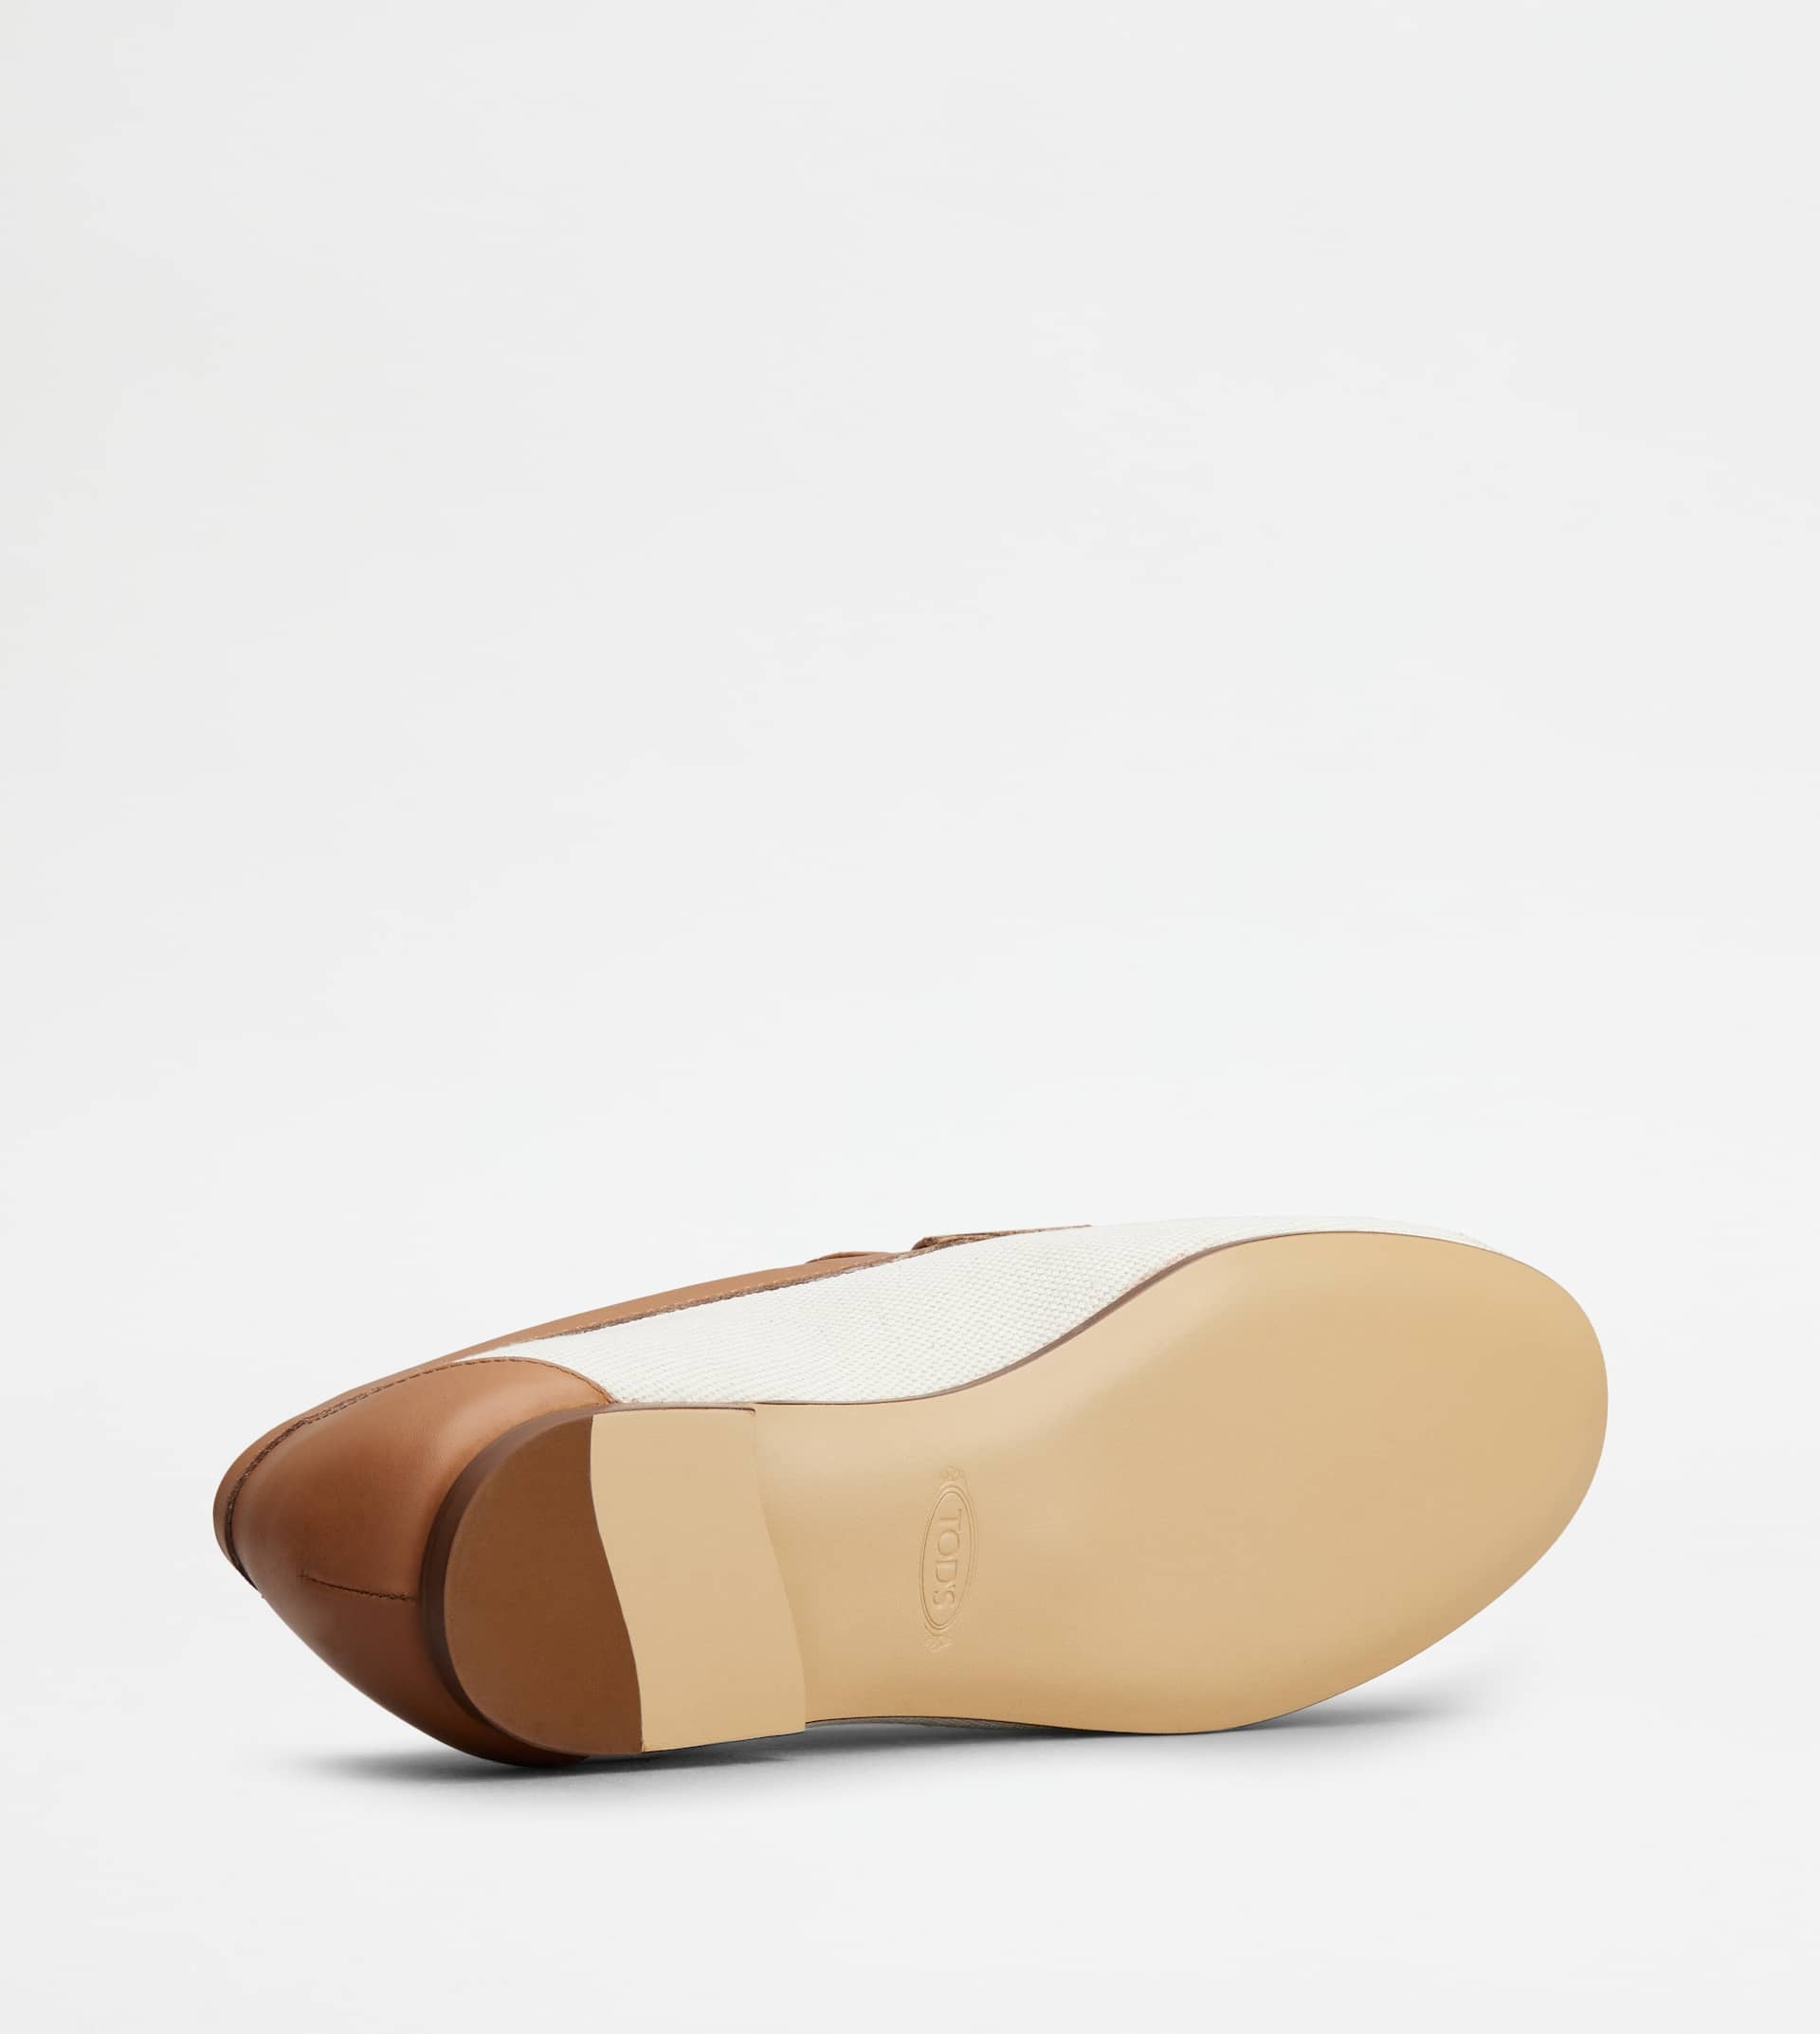 LOAFERS IN FABRIC AND LEATHER - OFF WHITE, BROWN - 5